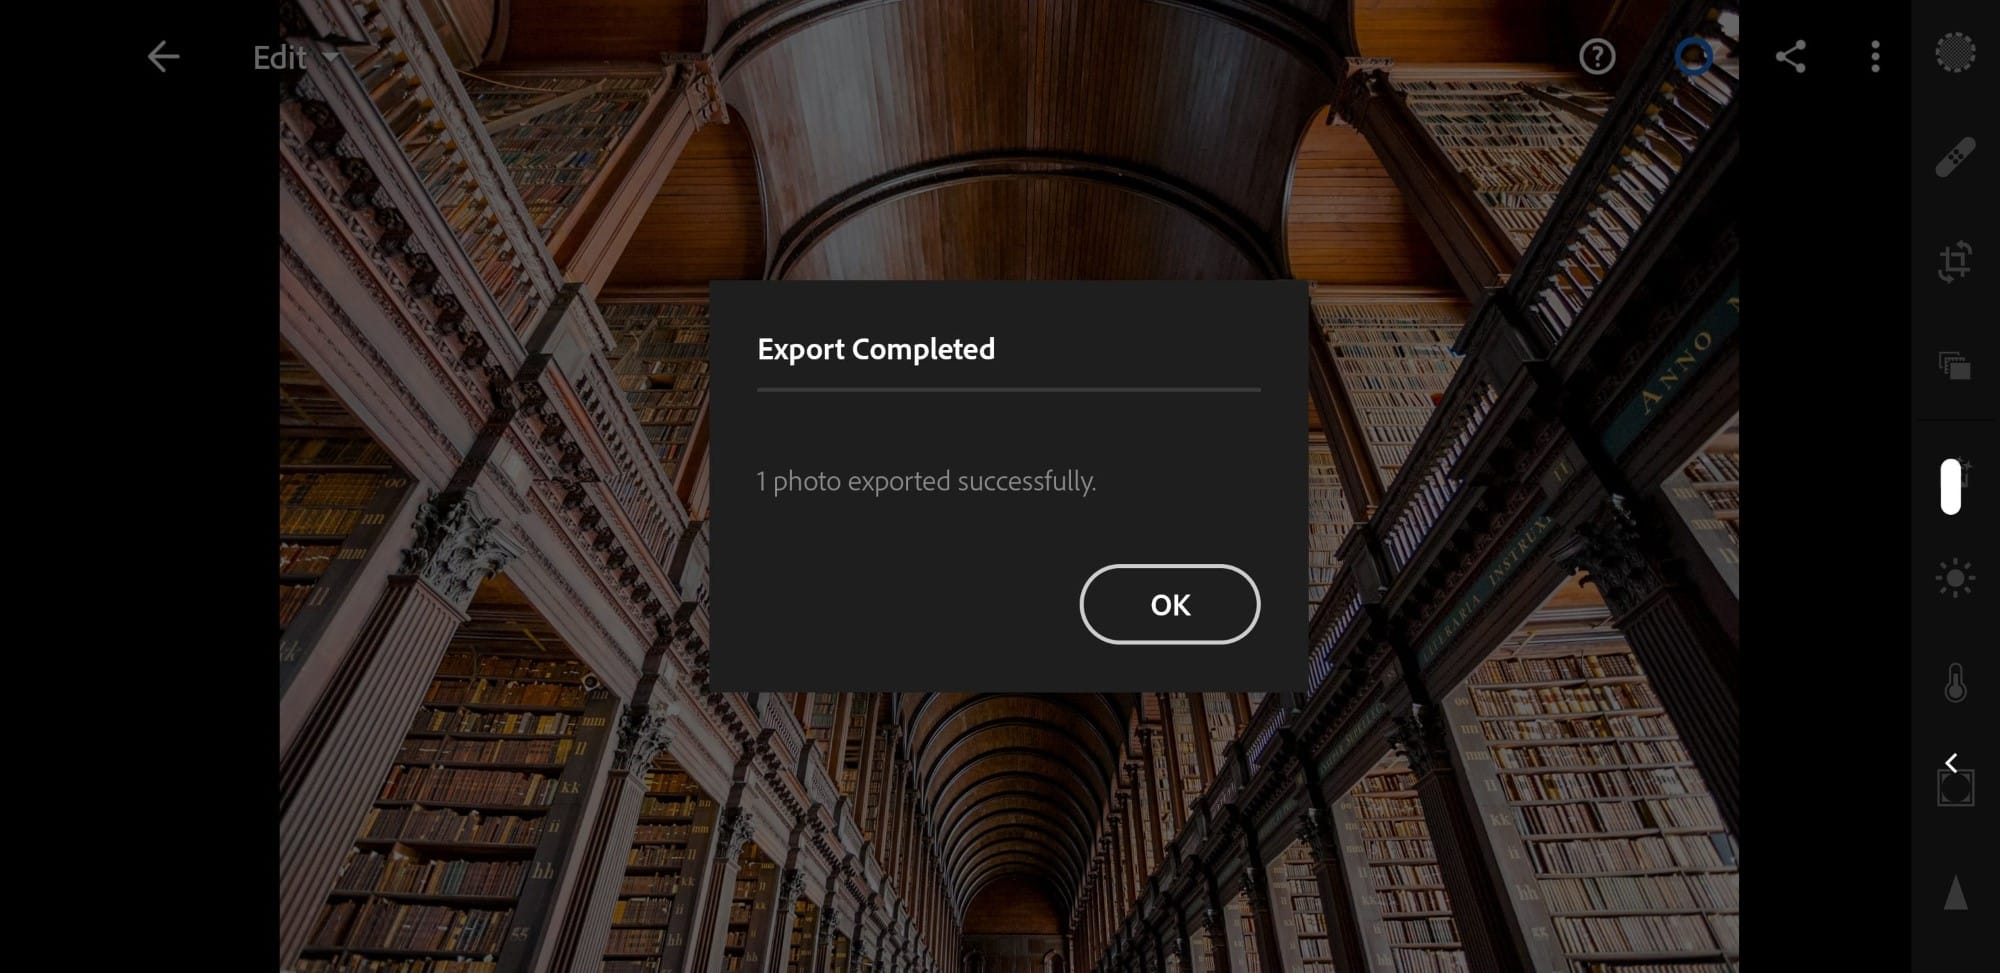 Export completed dialog